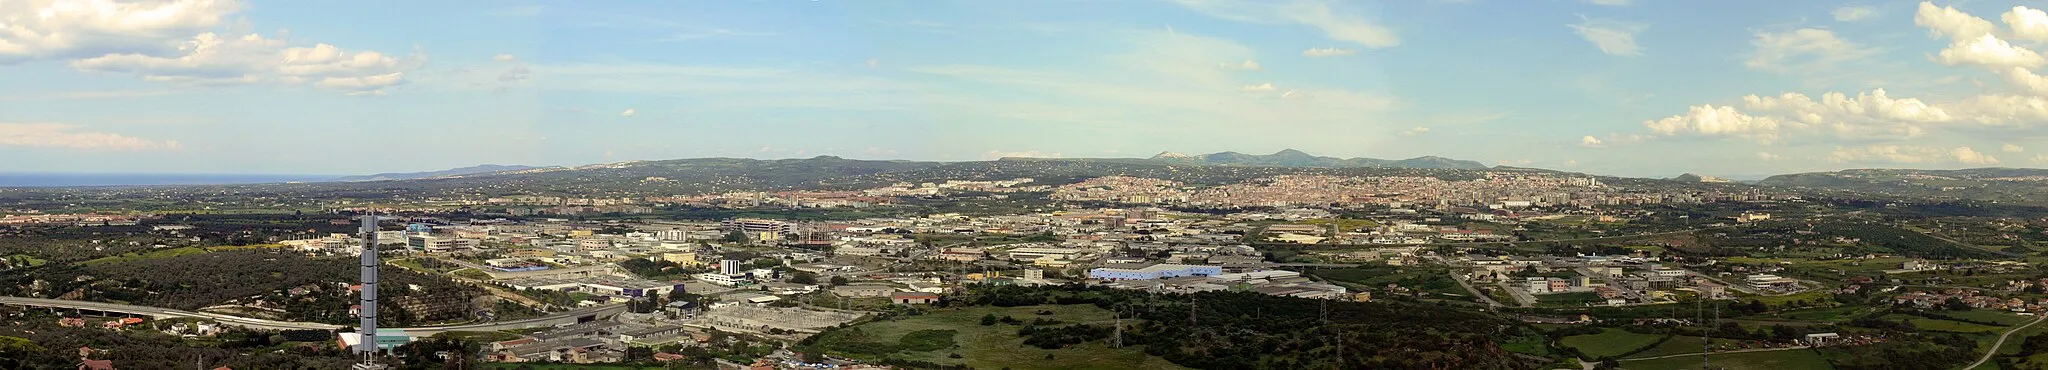 Photo showing: Panorama of the city of Sassari as seen from Monte Oro (Mount Gold) Hill.